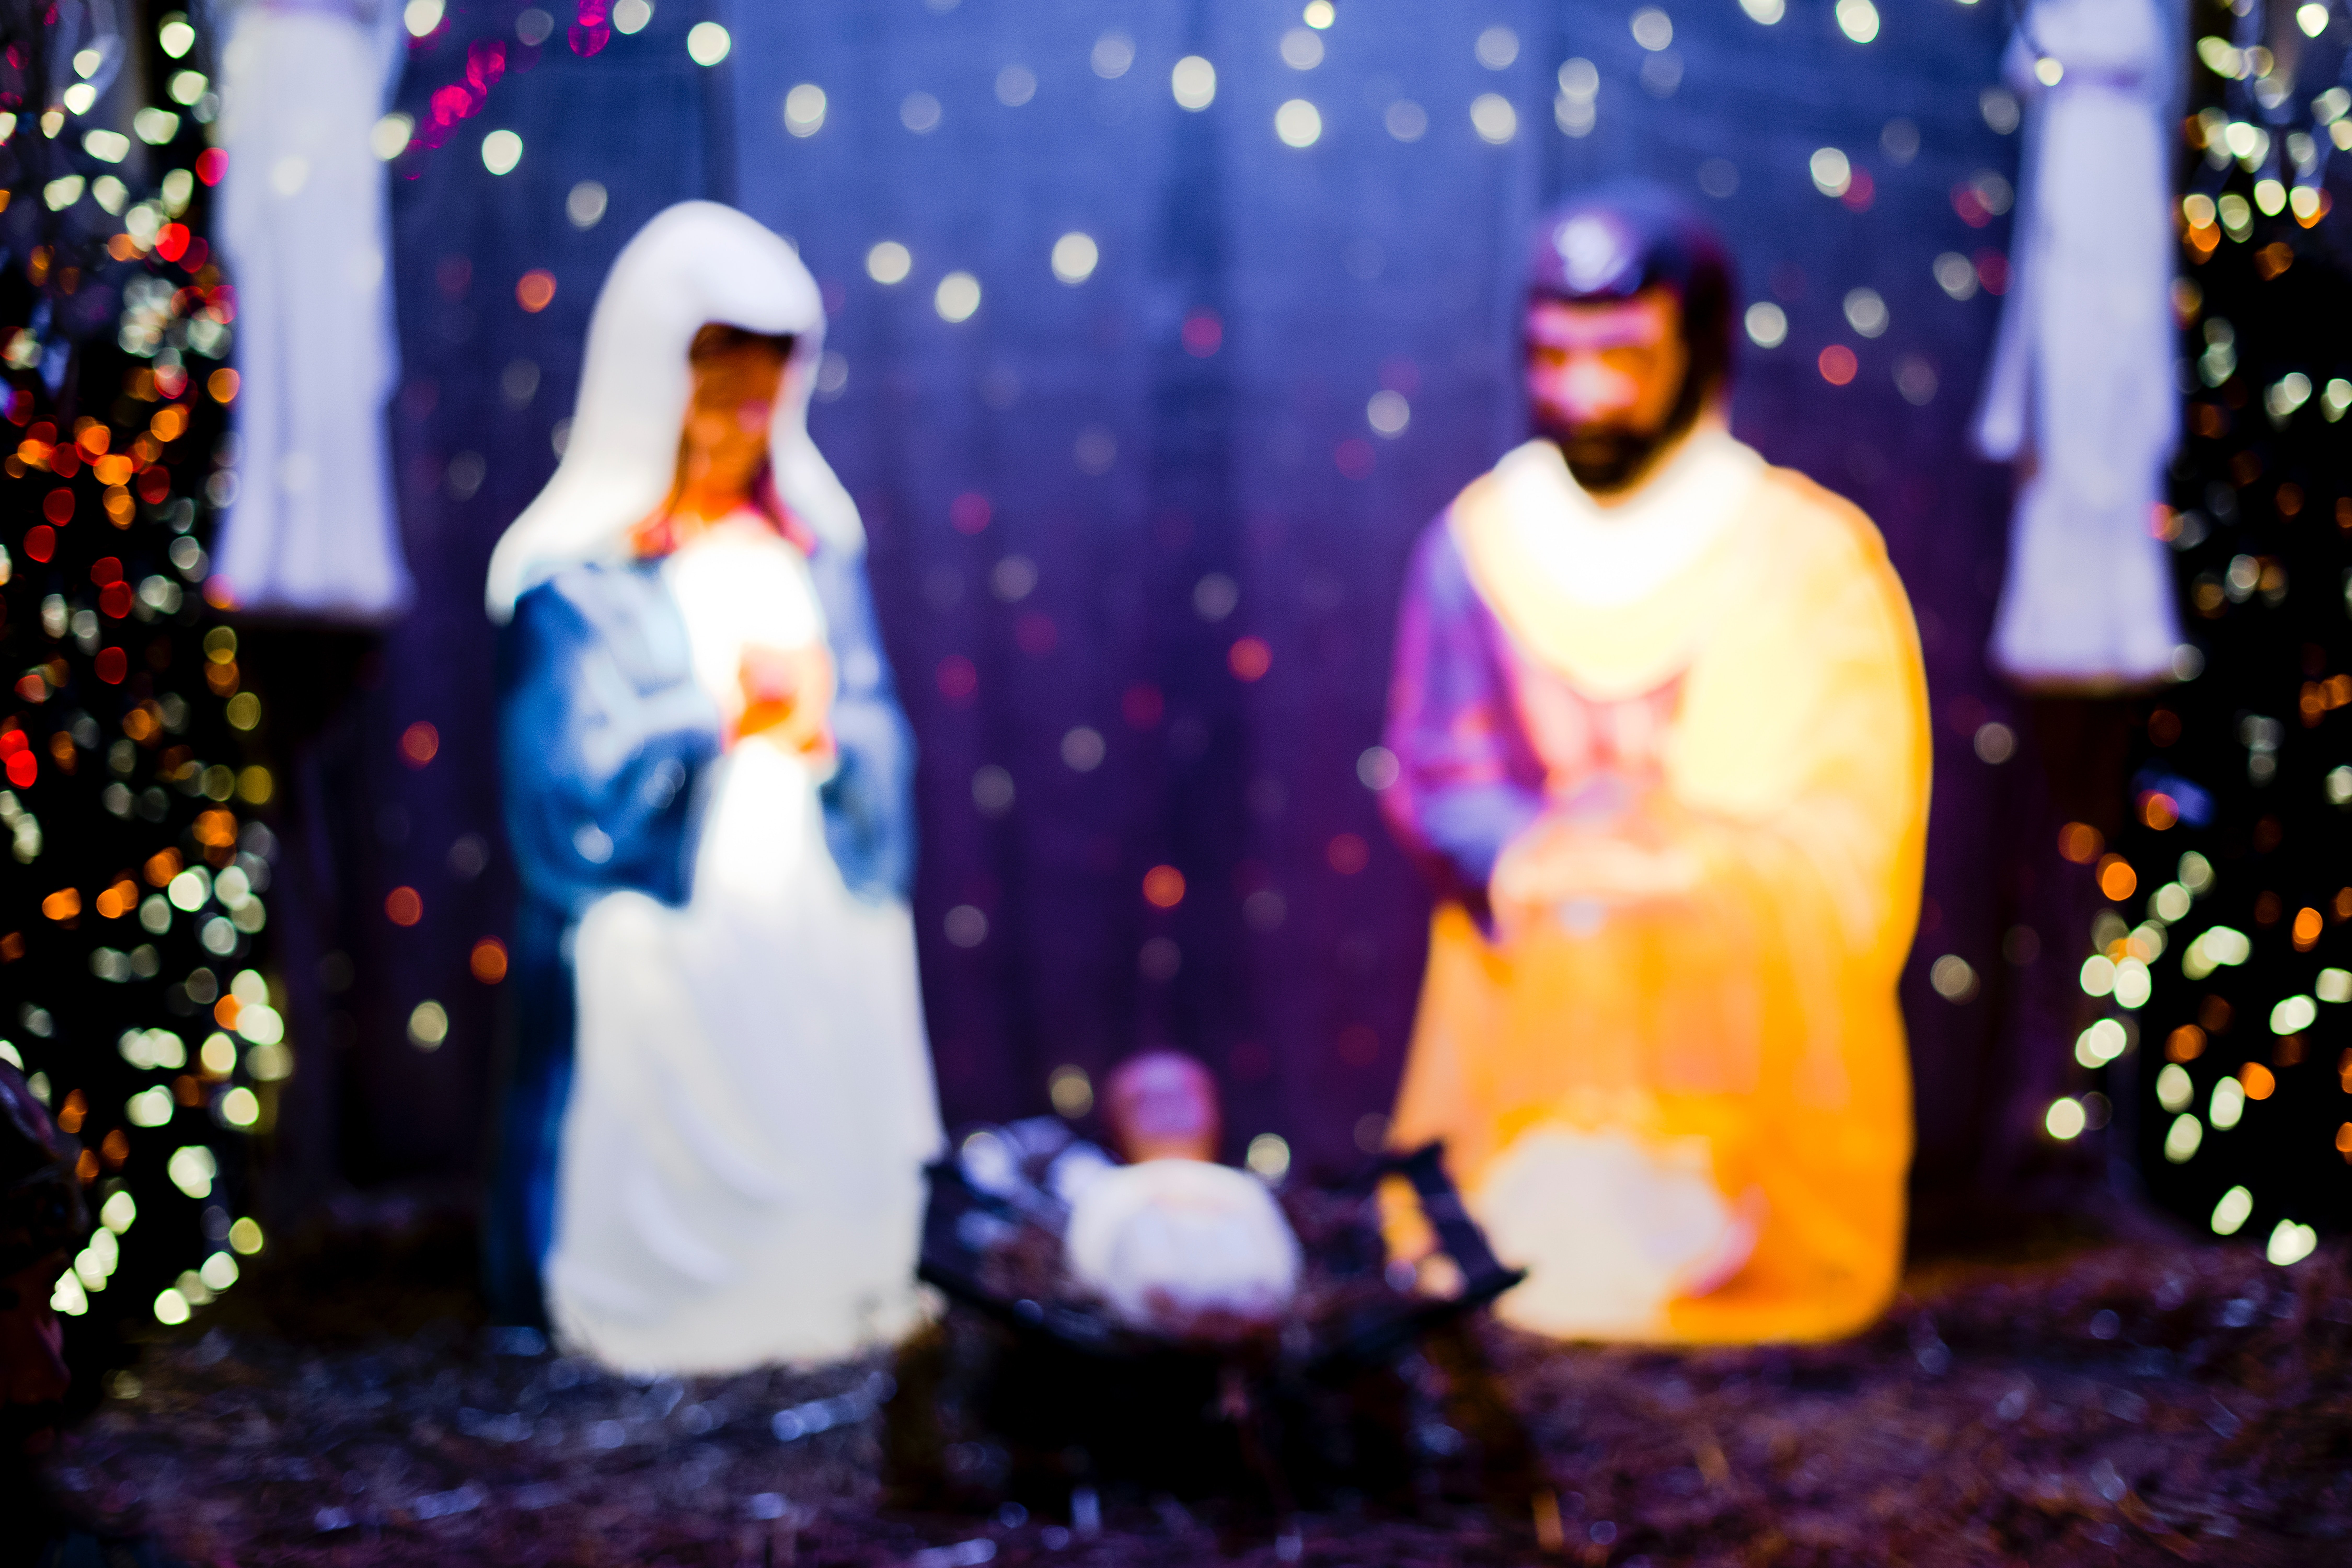 Delaware Town Bans Annual Nativity Scene Over Concerns It Could Be Dangerous ‘If the Wind Kicks Up’